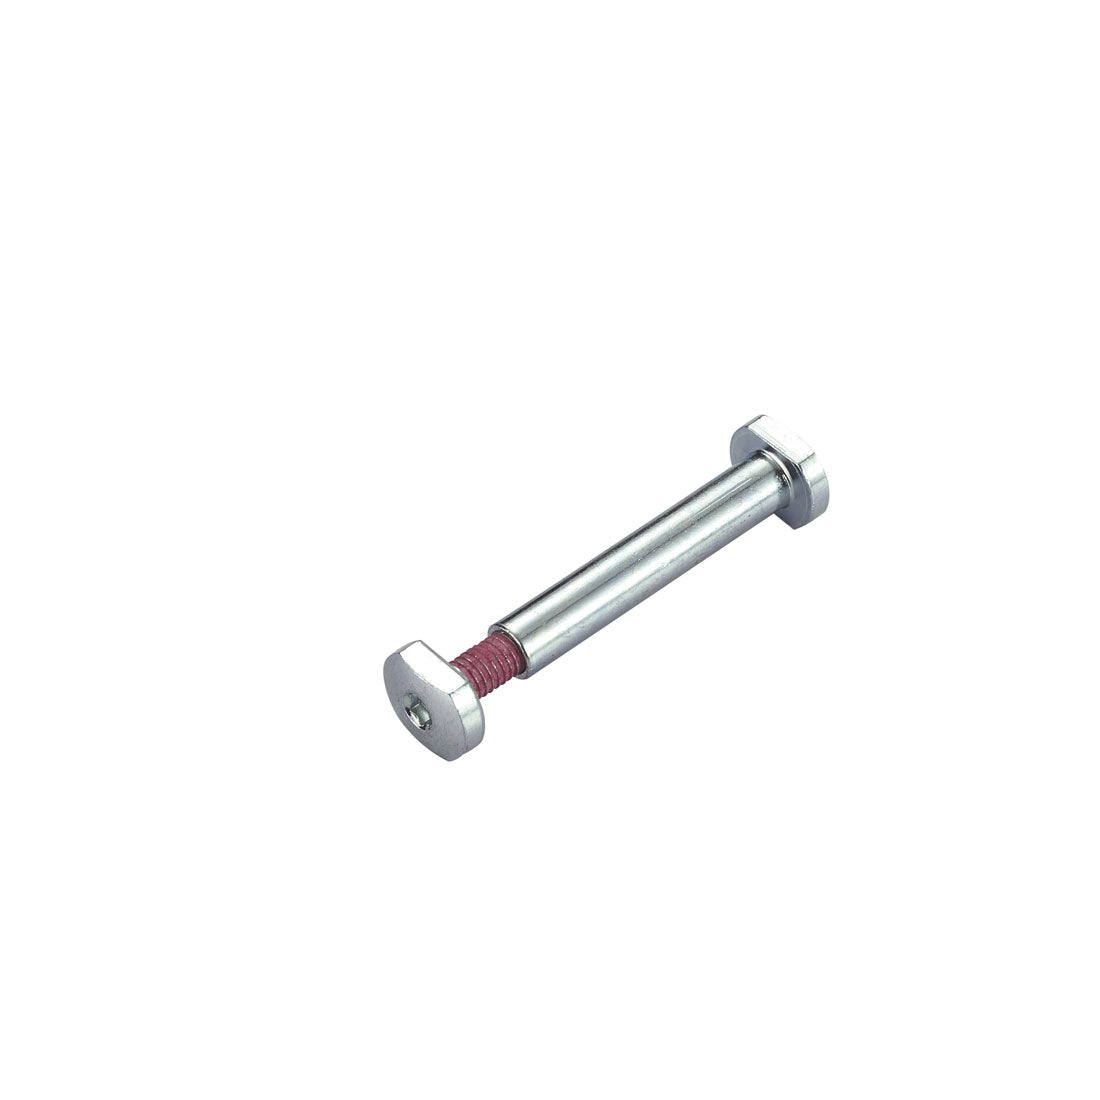 Micro Mini Front Wheel Axle RH 46.5mm - 4586/4660 Scooter Hardware and Parts